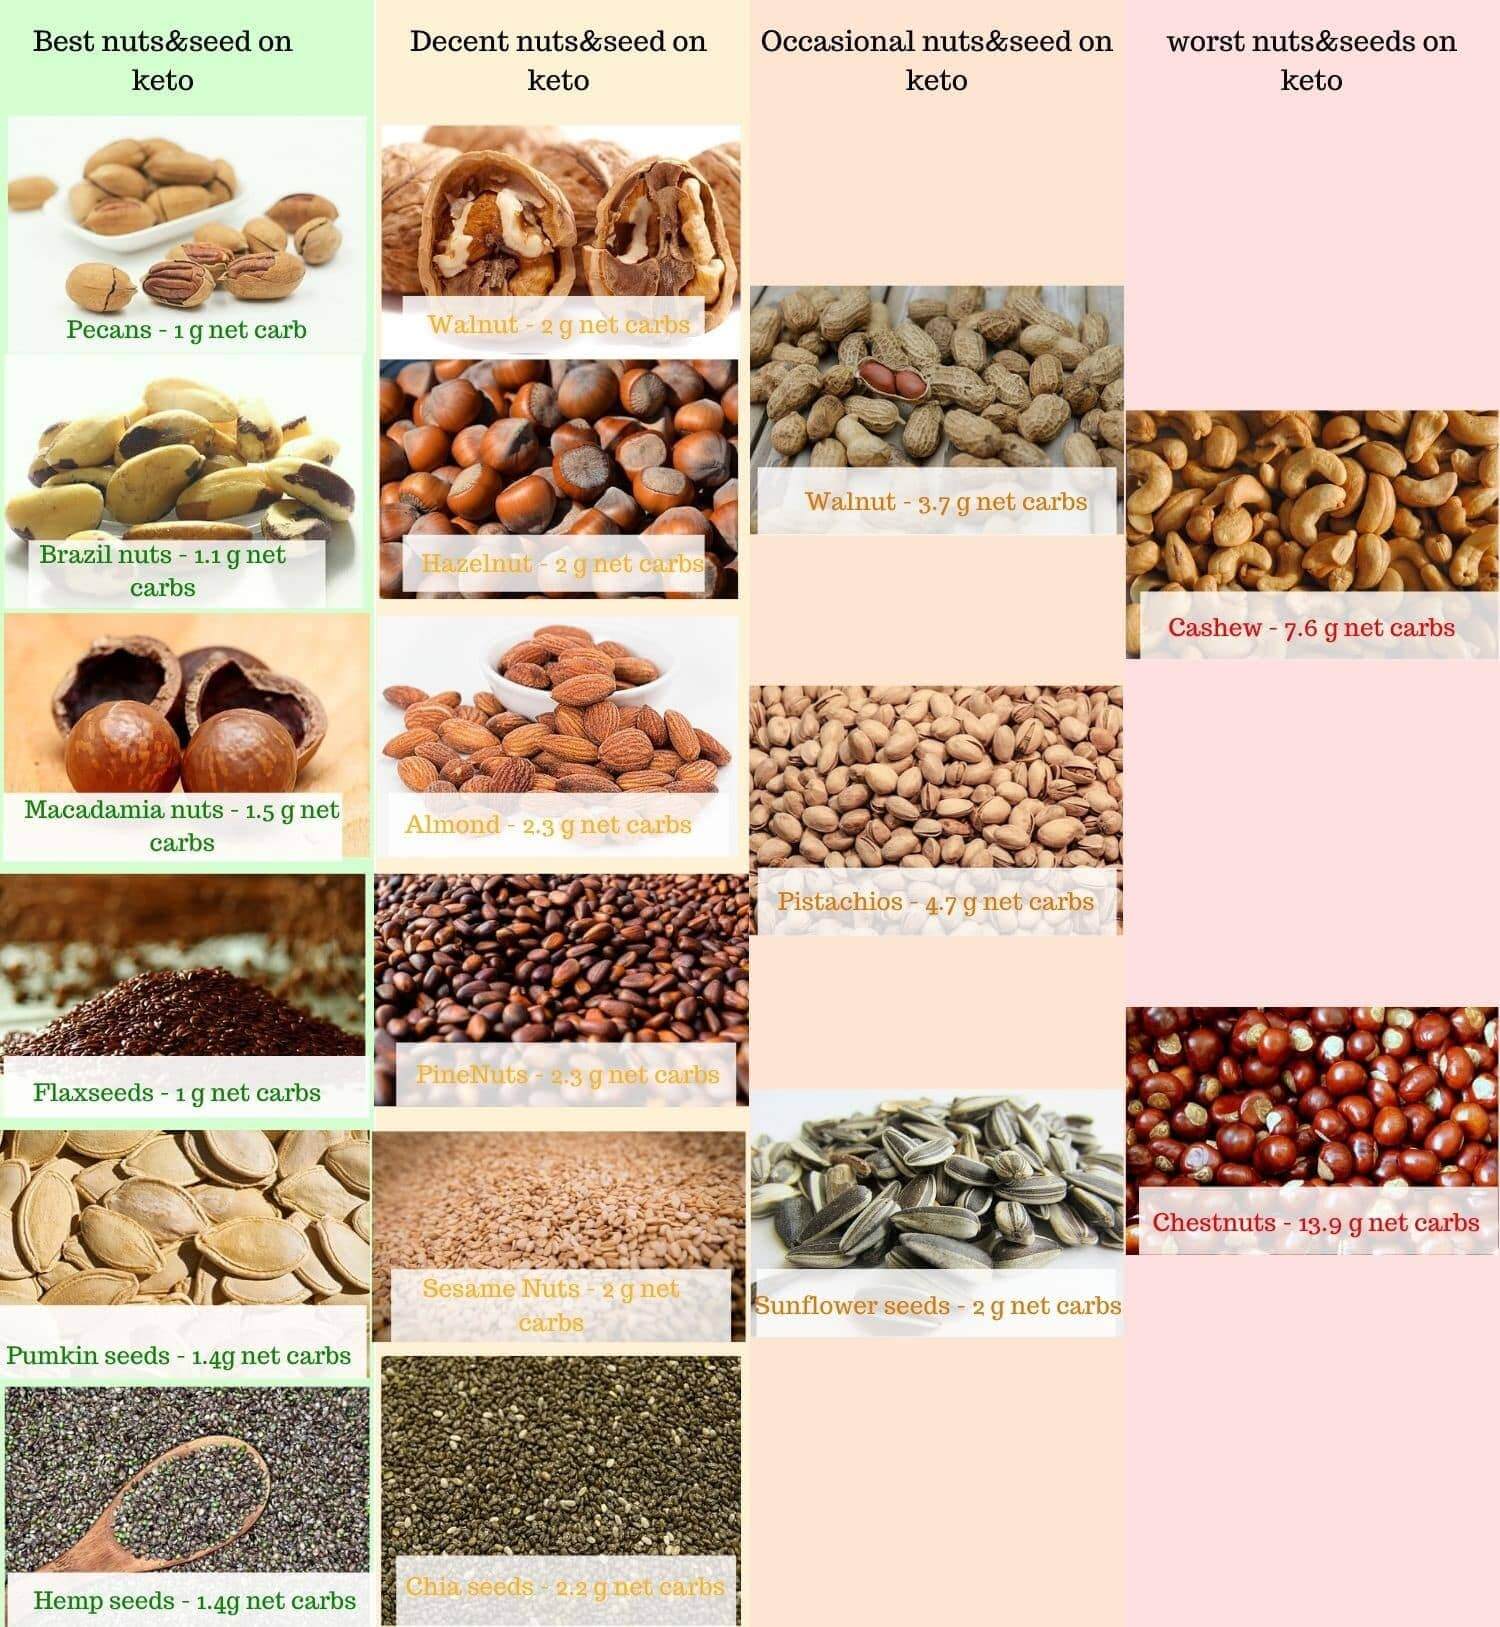 best and wost snuts and seeds on keto, best nuts on keto, worst nuts on keto